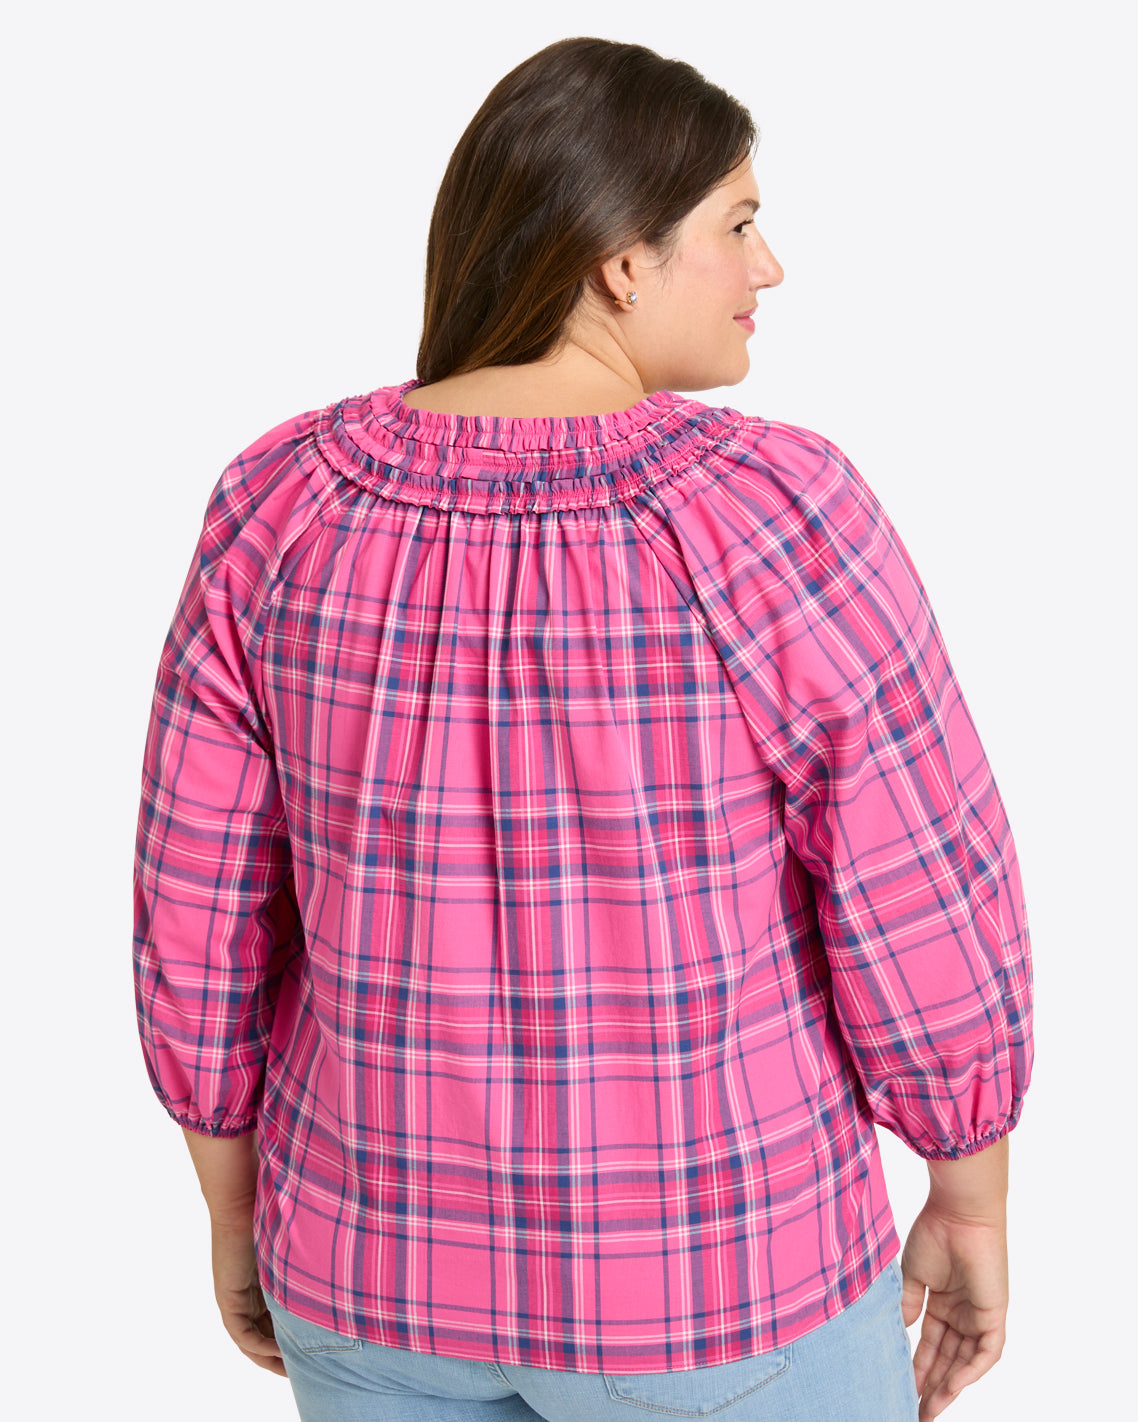 Aubrie Top in Pink Angie Plaid